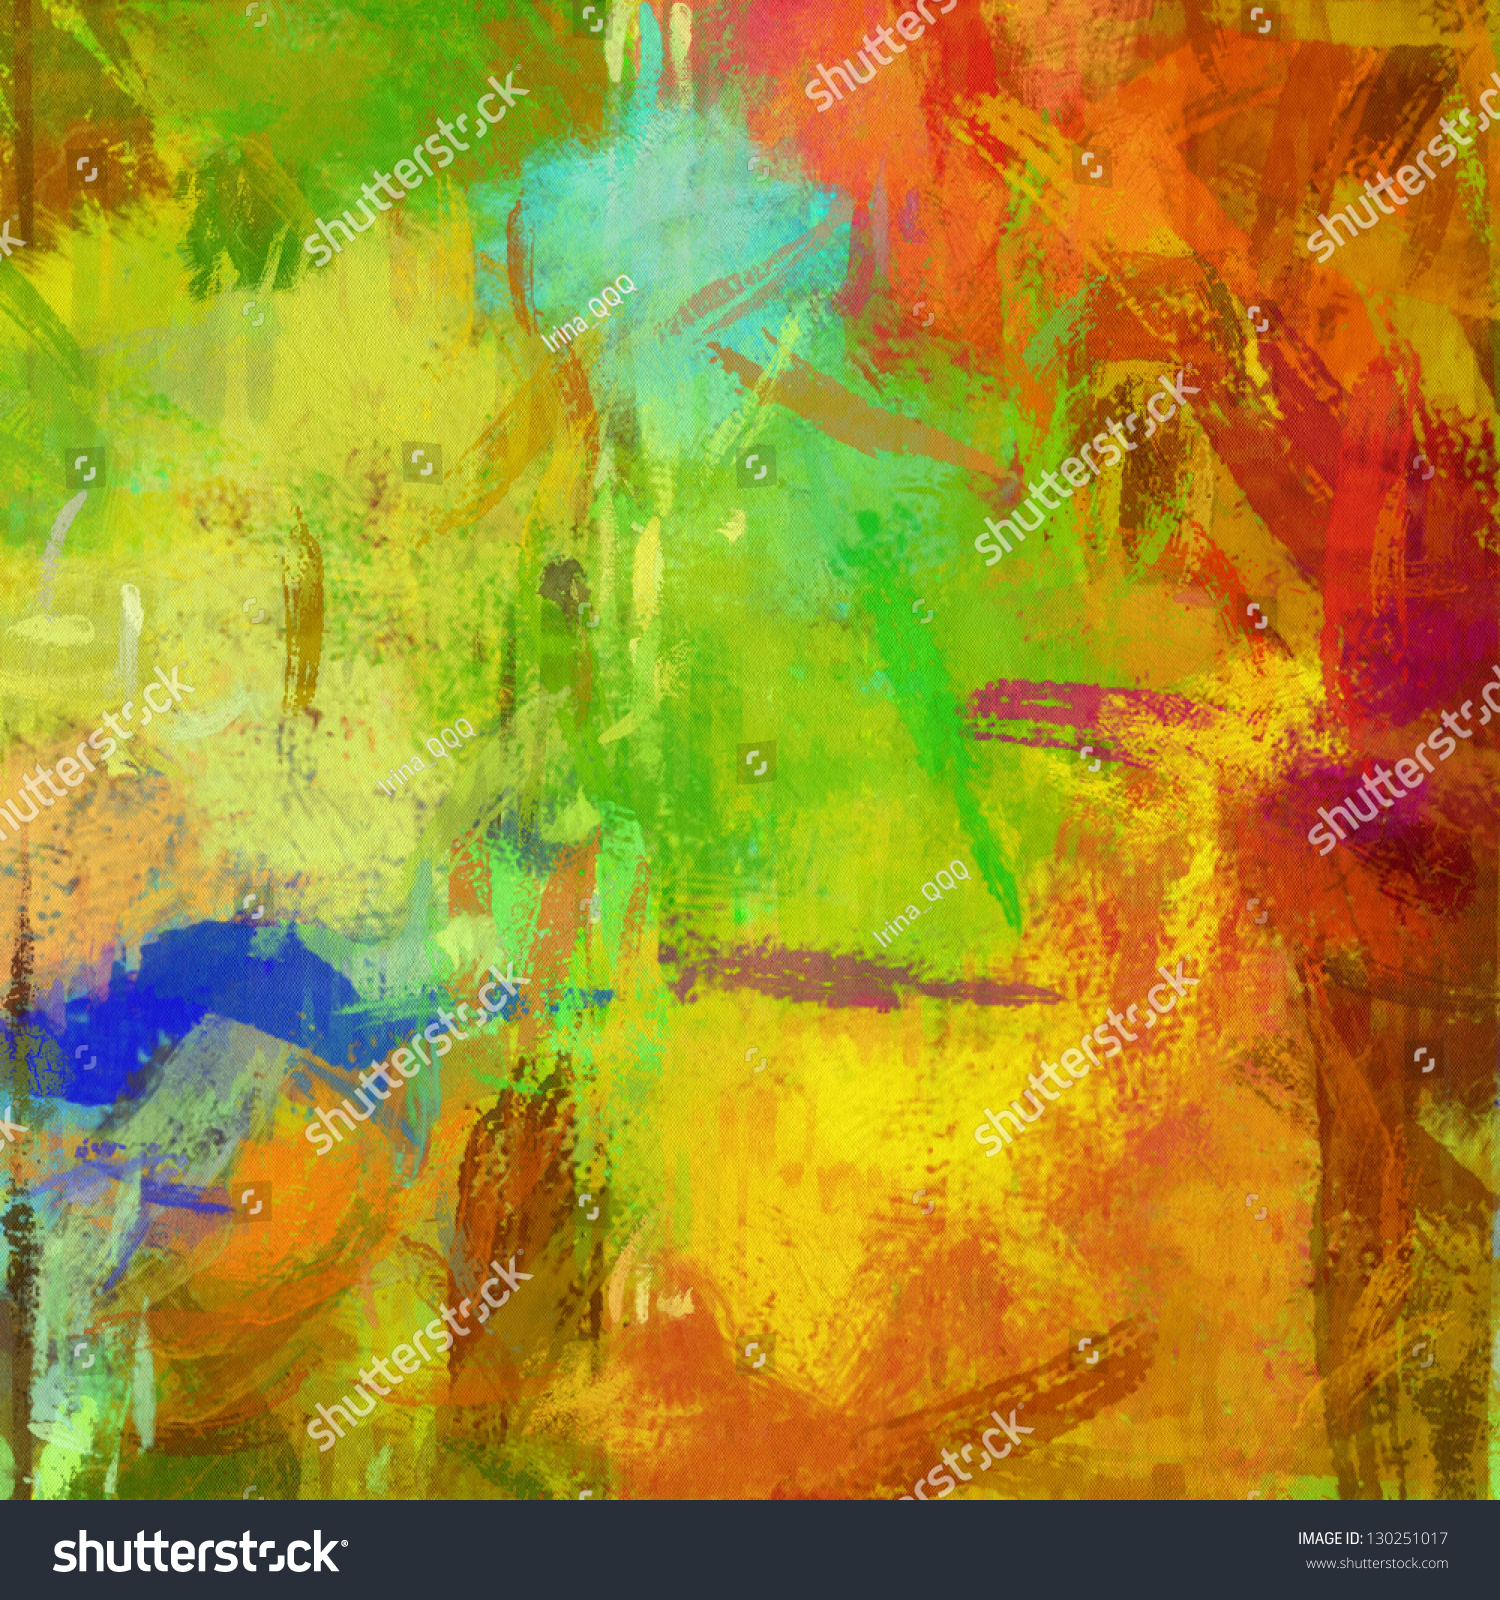 Art Abstract Painted Rainbow Chaotic Background Stock Illustration ...